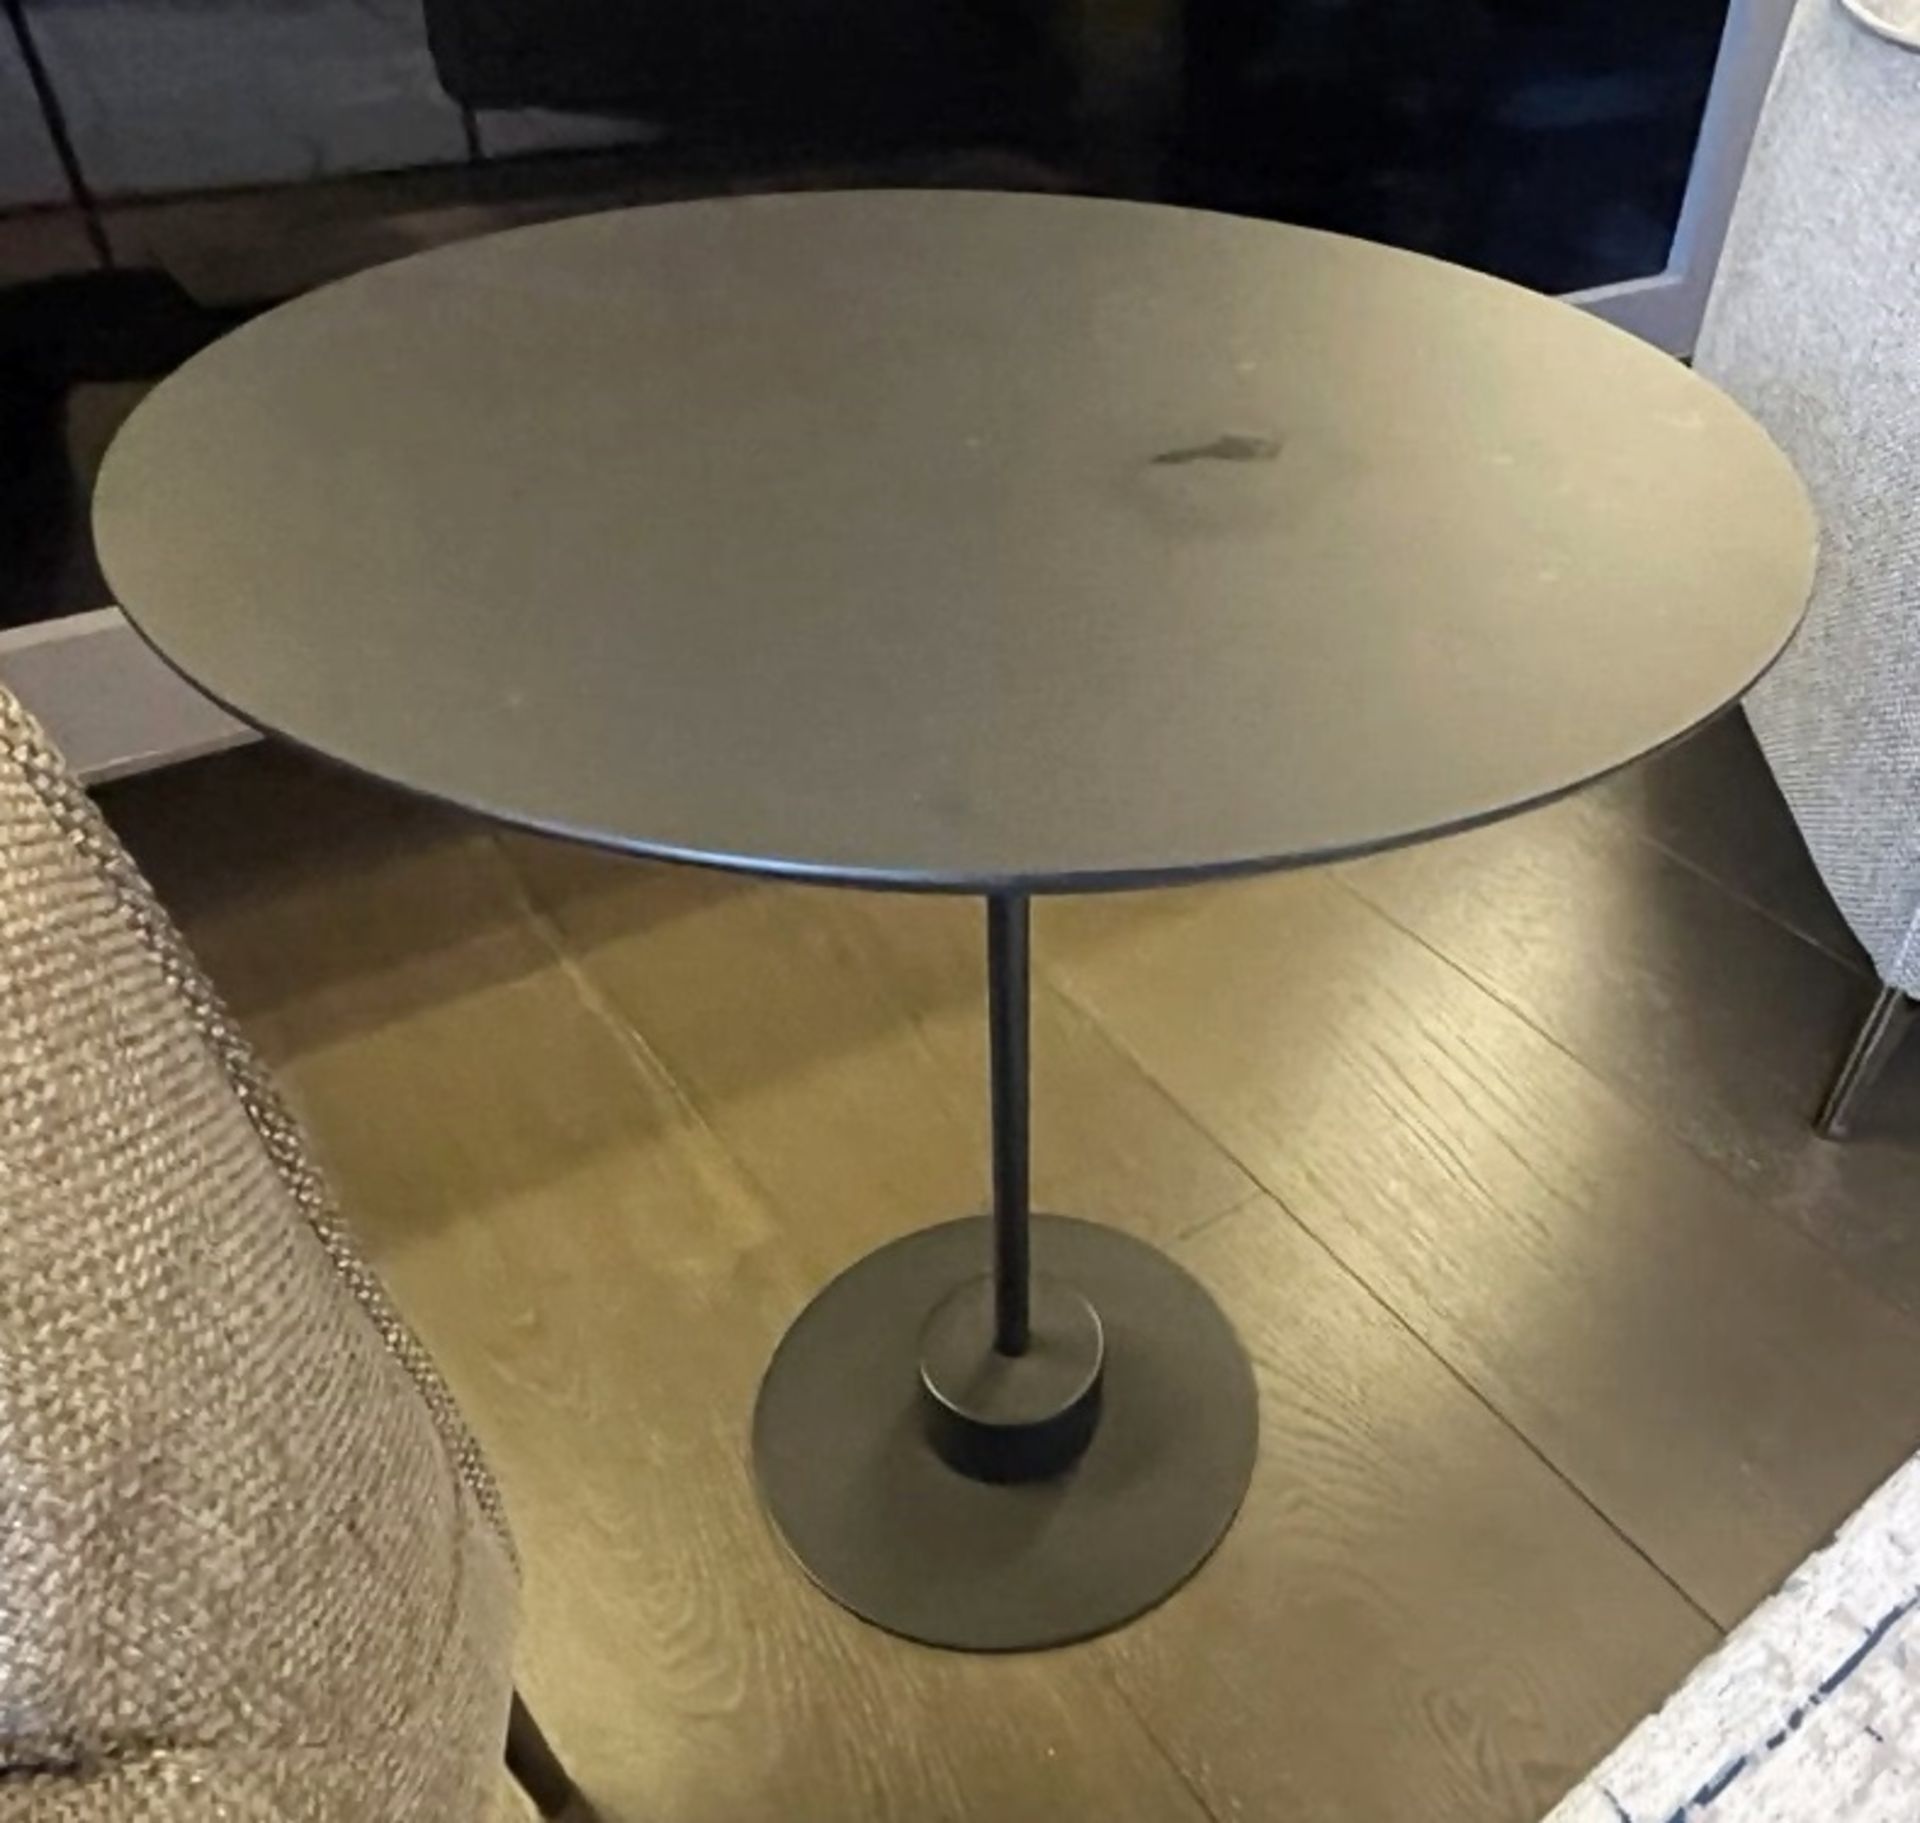 1 x Stylish Round Occasional Metal Table with a Bronzed Finish and Industrial Aesthetic - Image 2 of 4